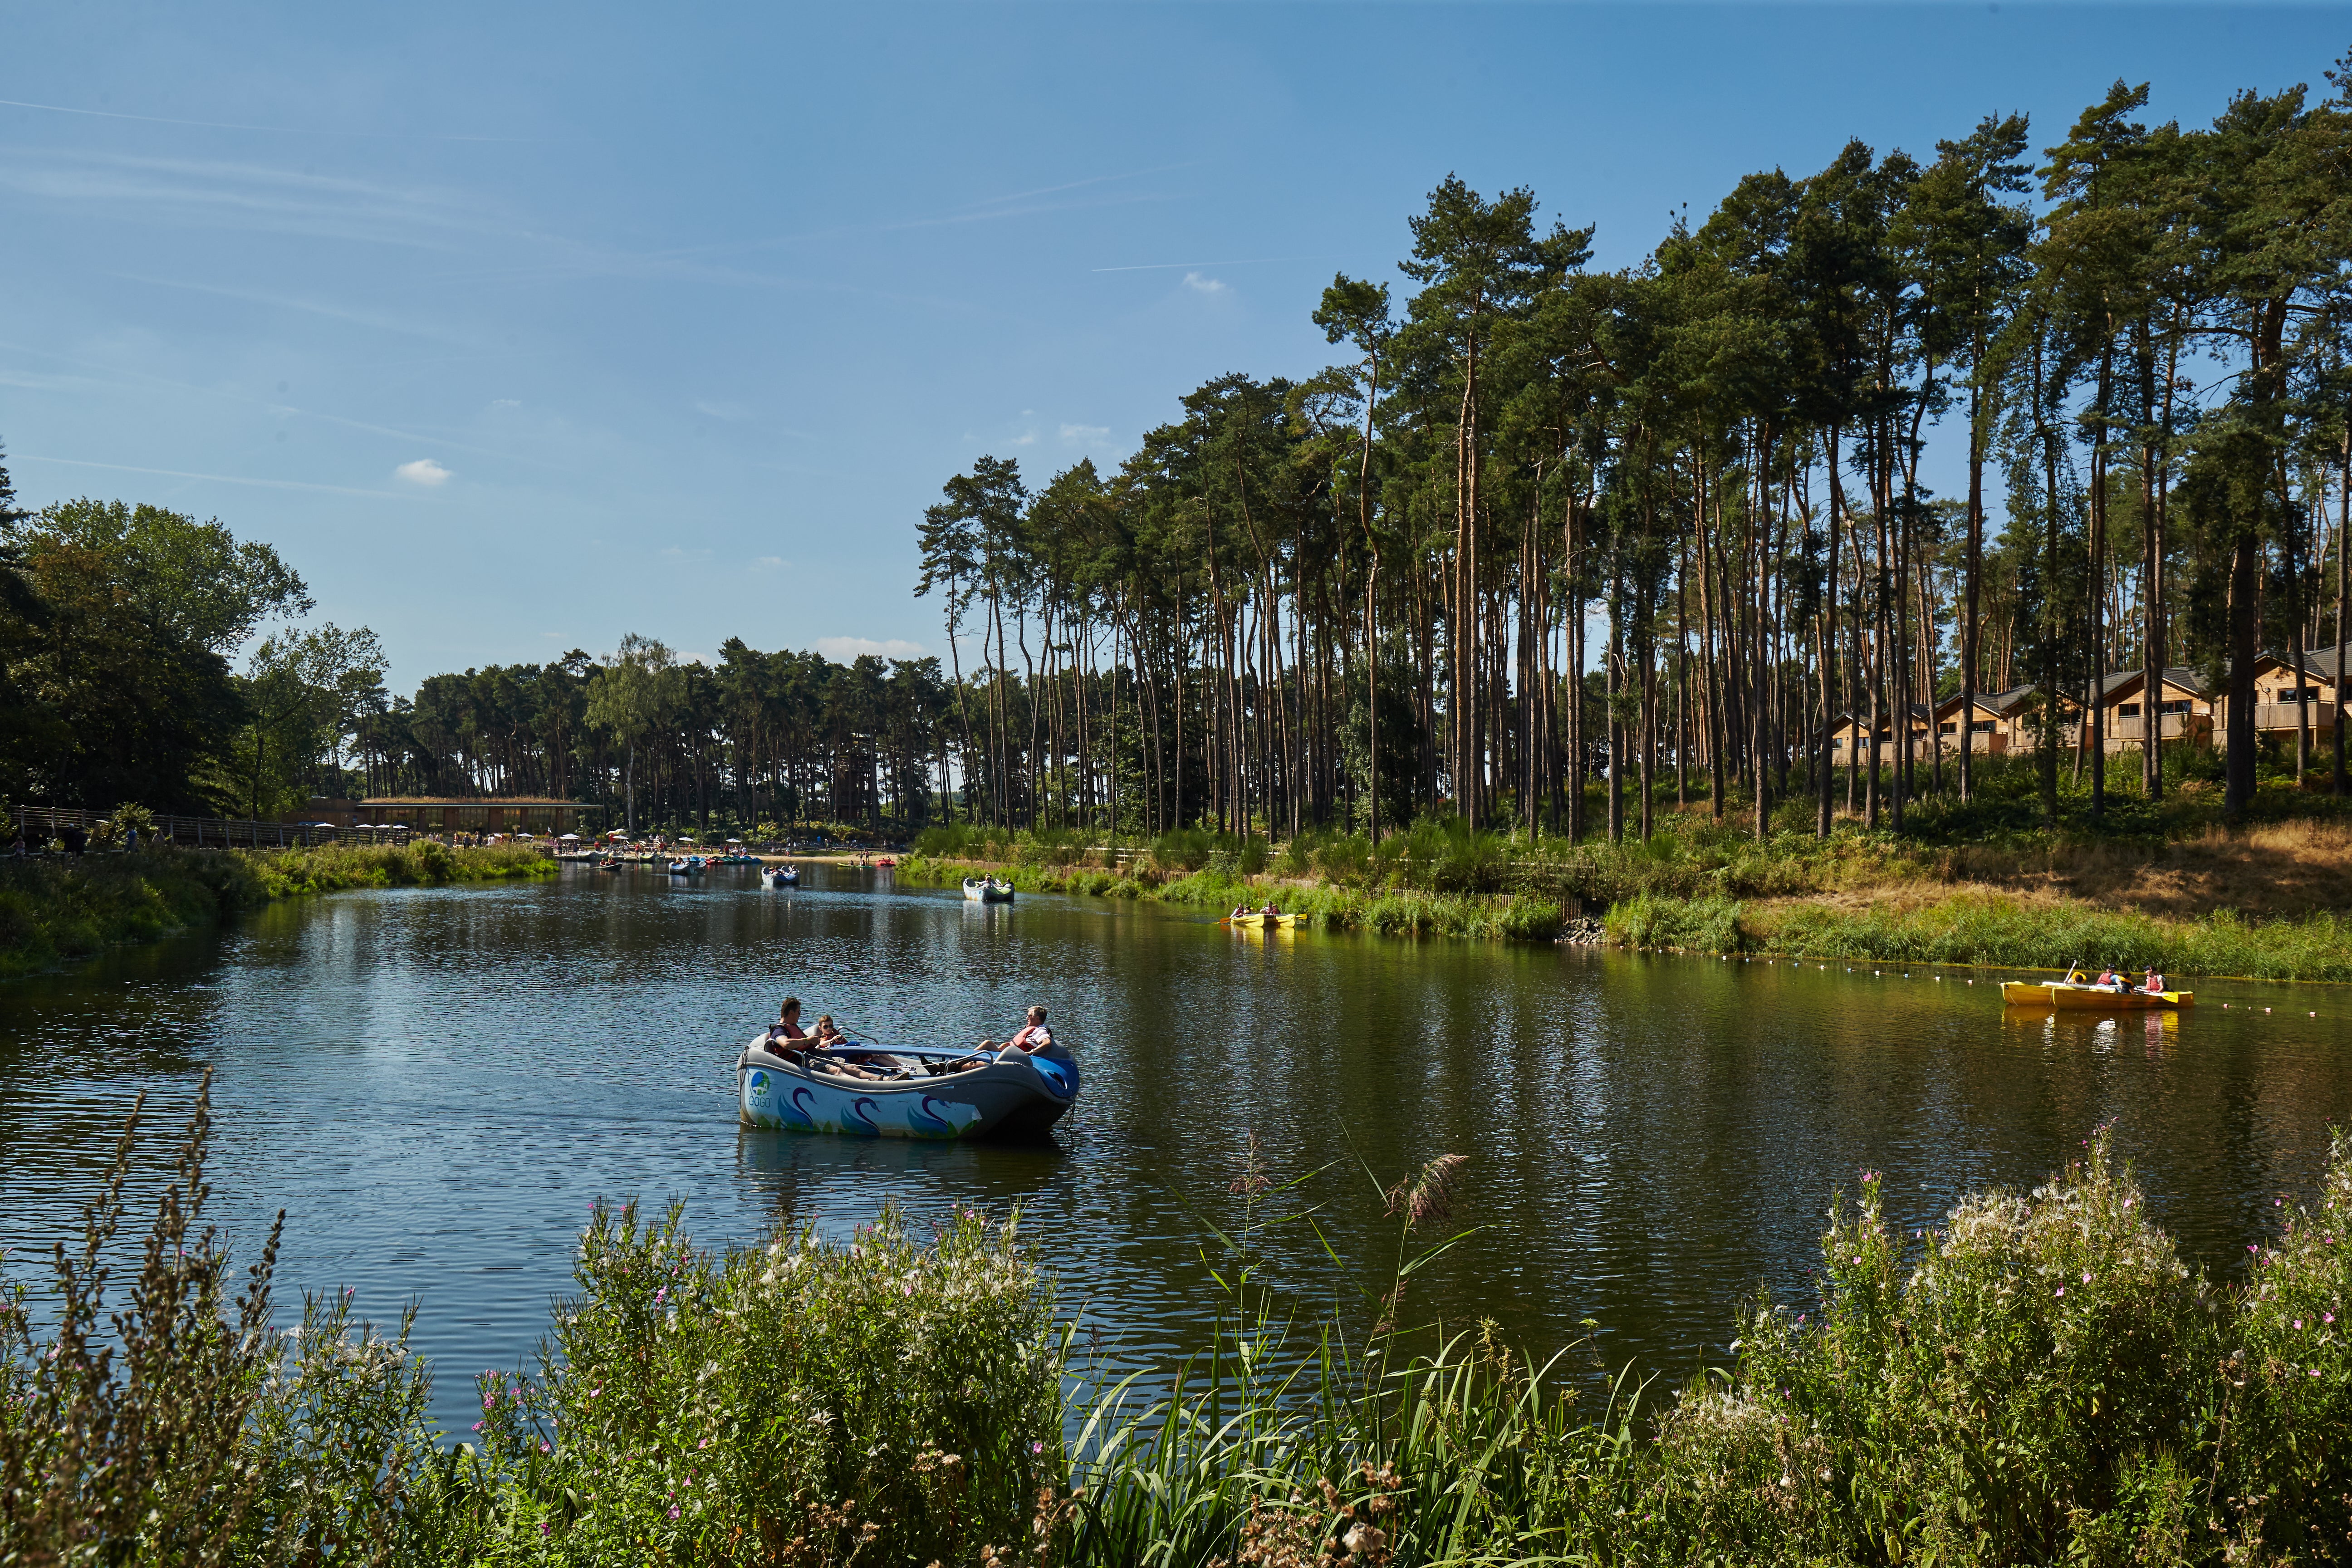 Center Parcs in Woburn Forest is one hour from London